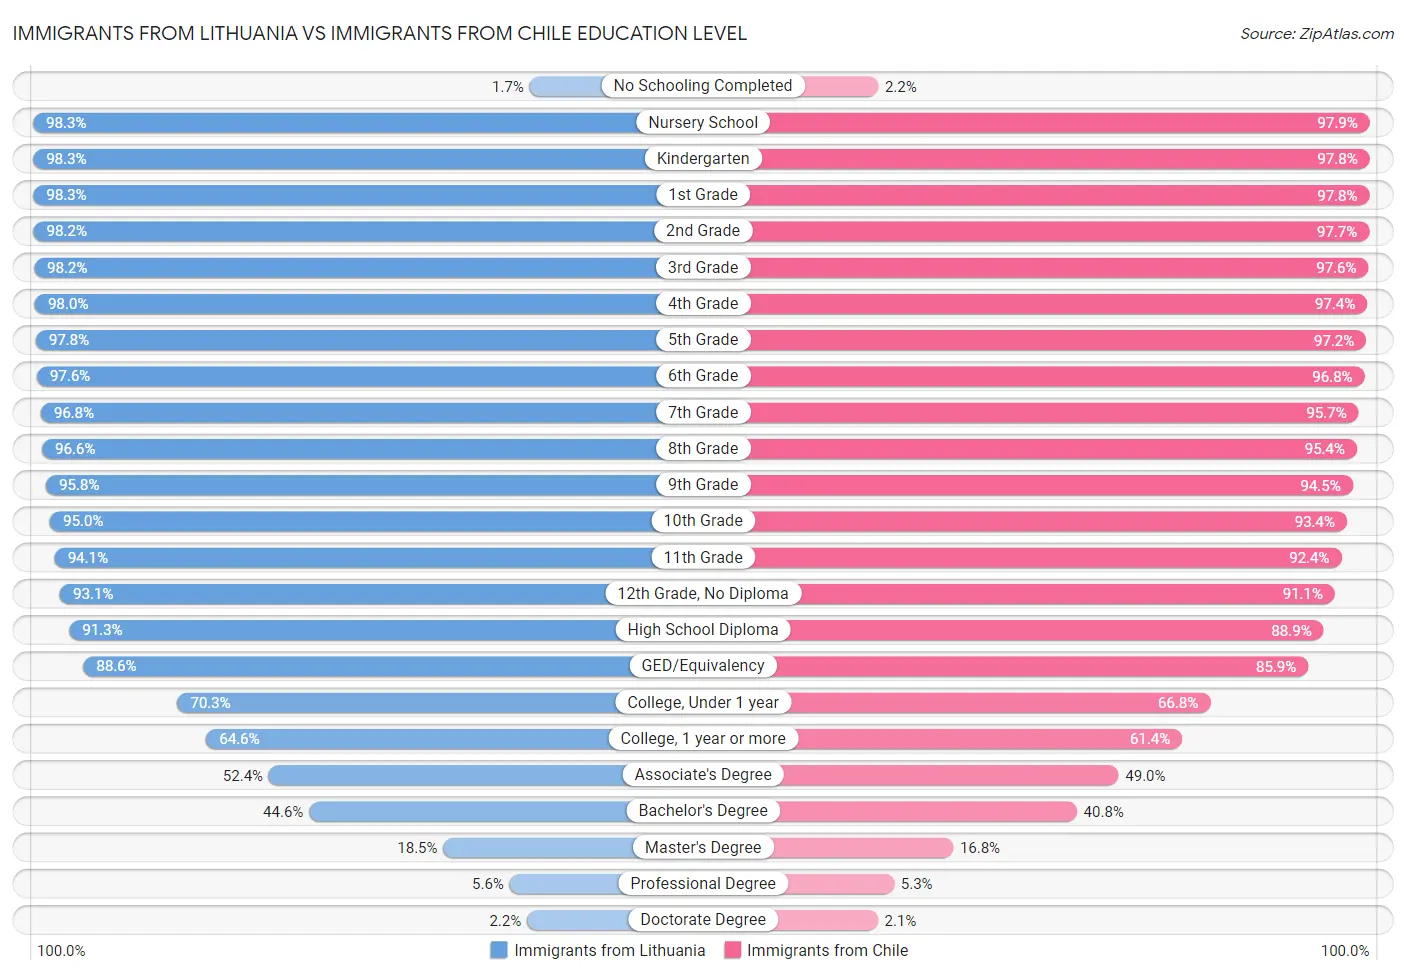 Immigrants from Lithuania vs Immigrants from Chile Education Level